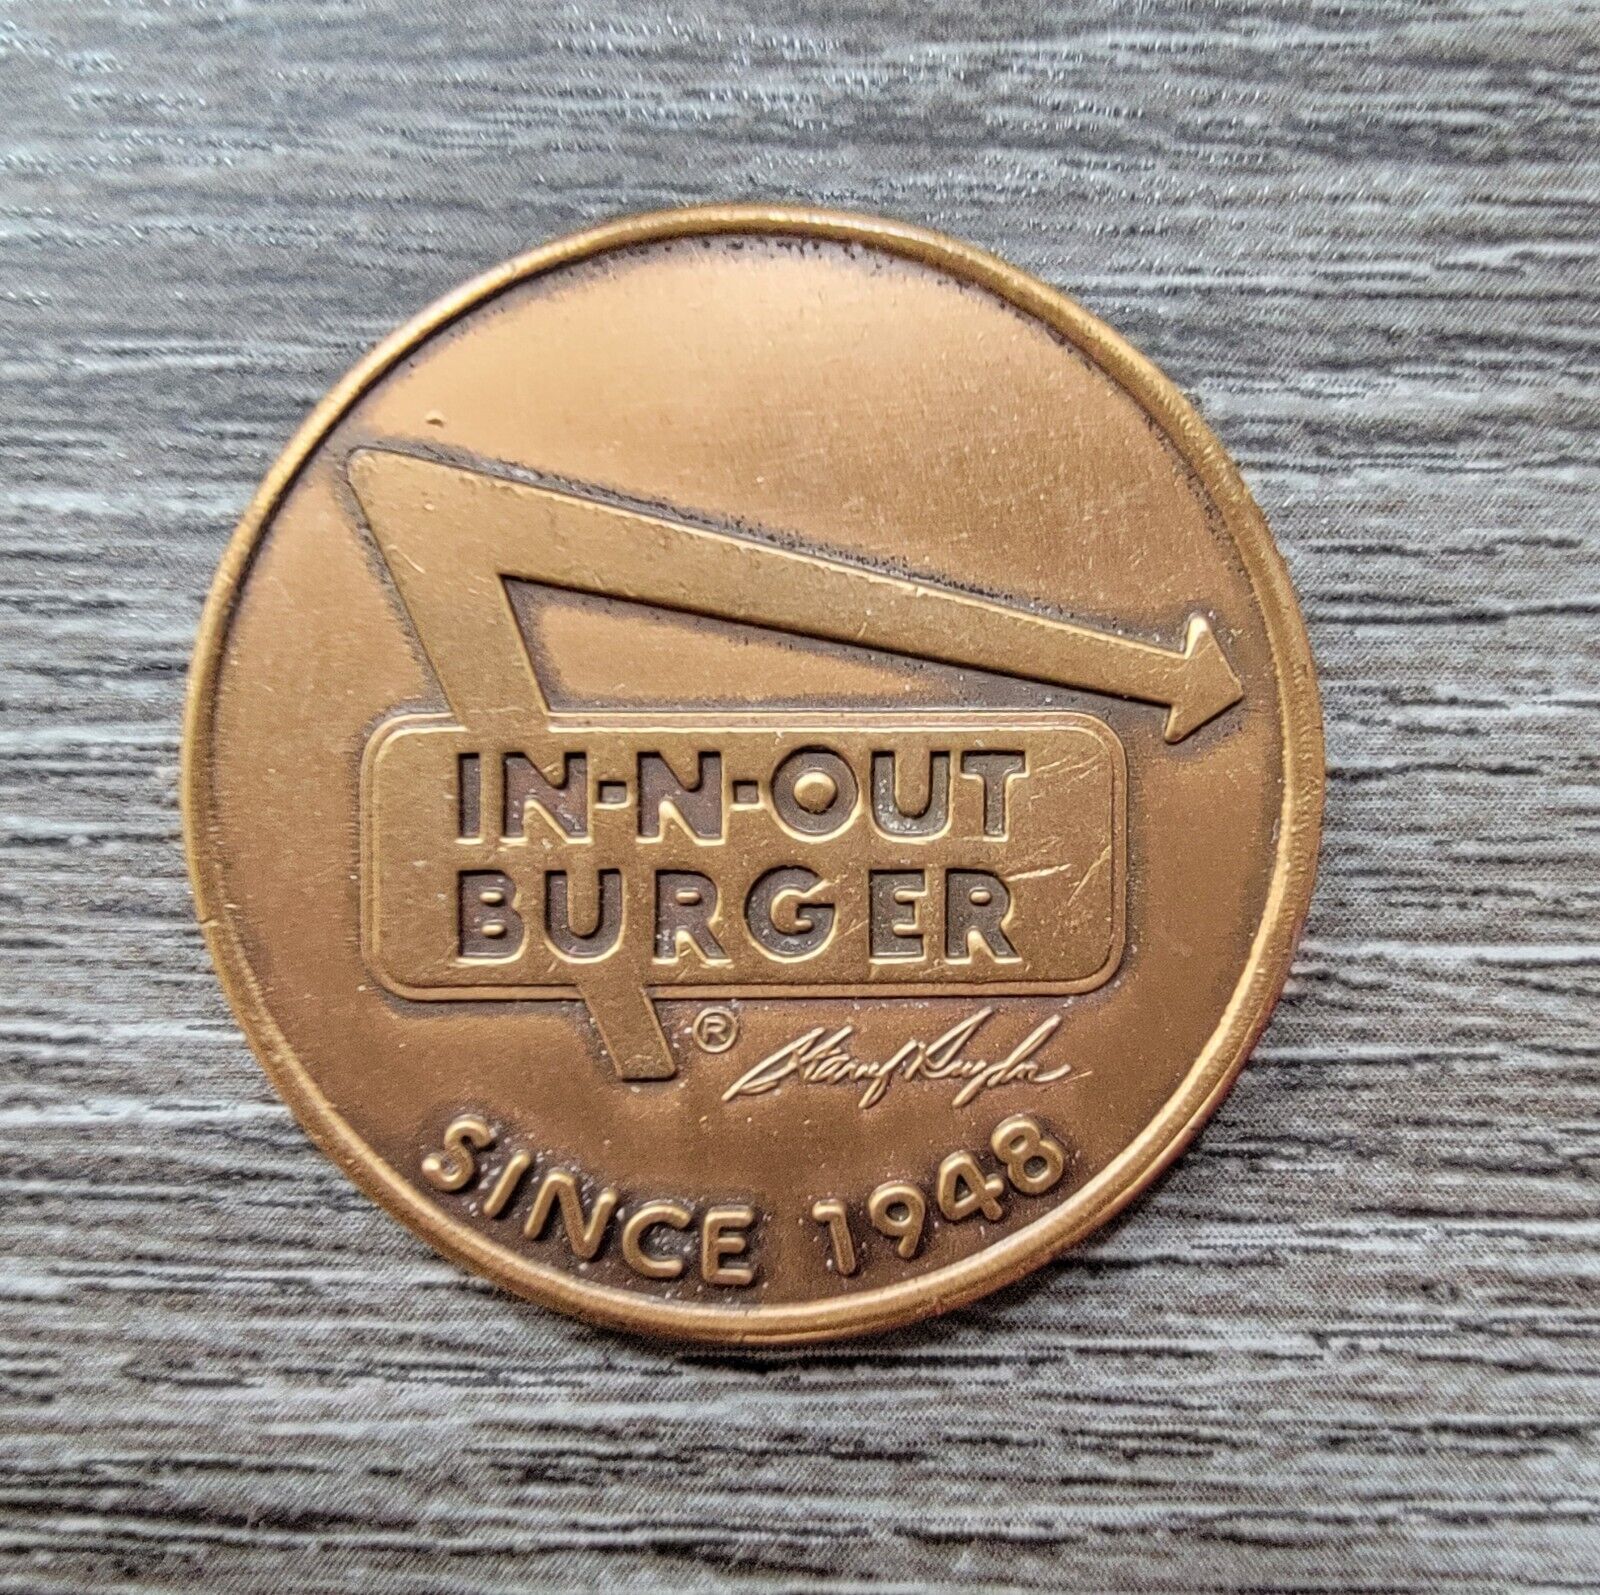 IN-N-OUT Burger INO RARE NMT 30th Anniversary Commemorative 1978 Burger Coin